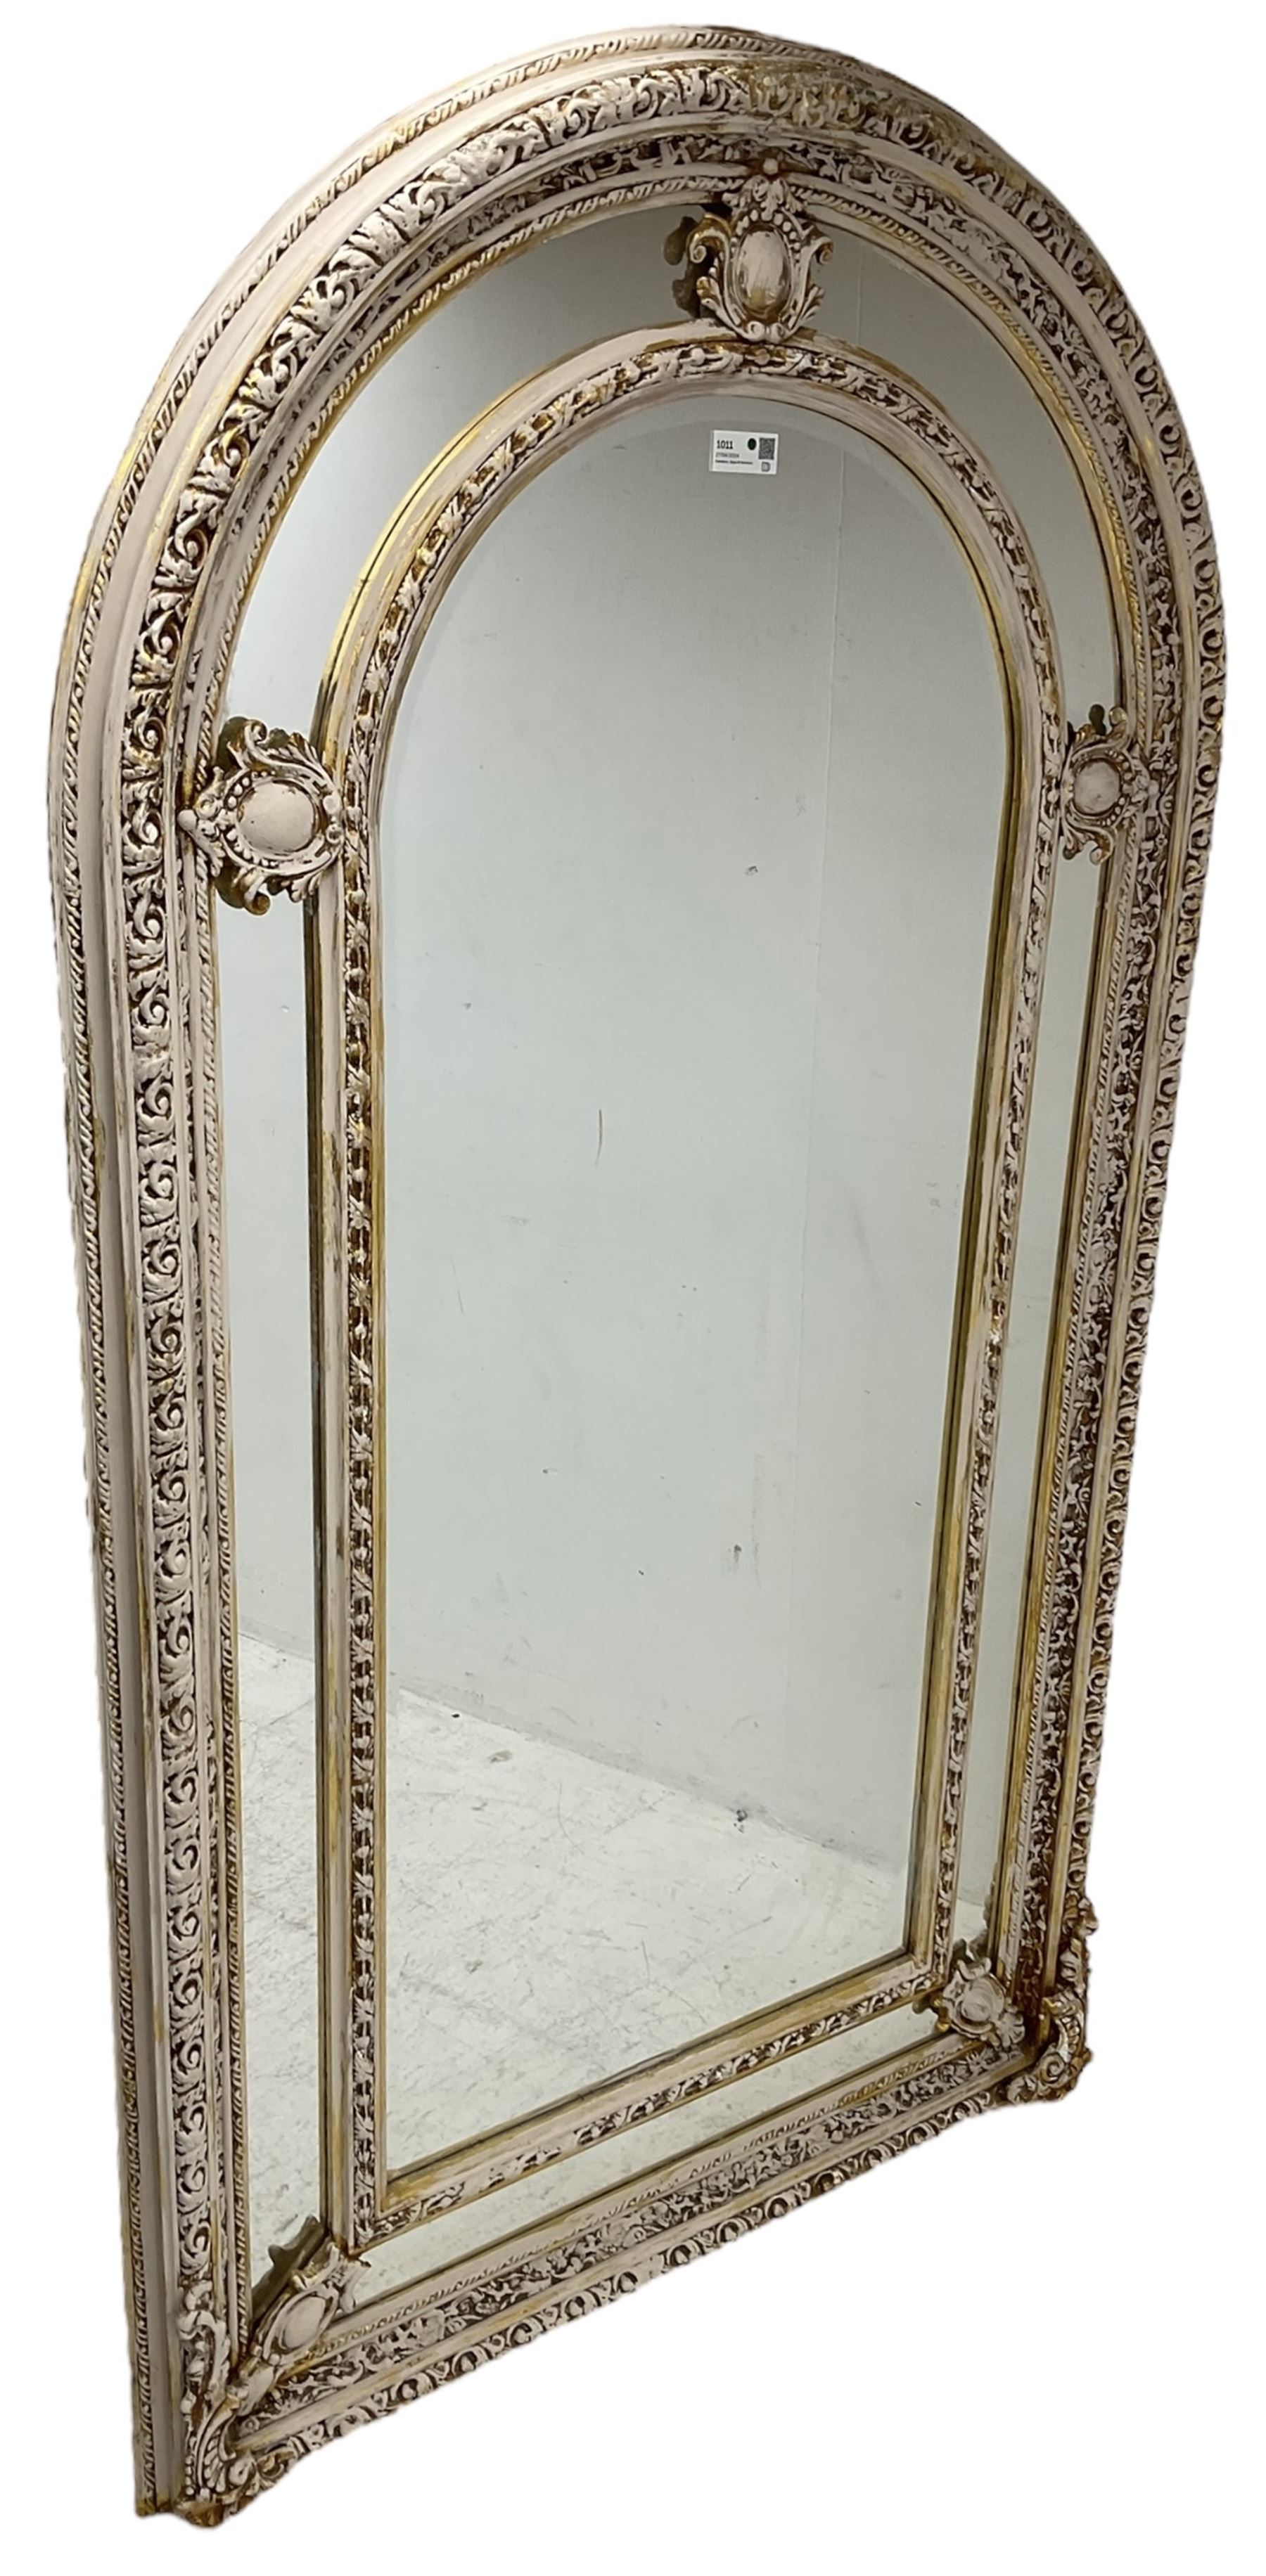 Large painted and gilt arched wall mirror - Image 2 of 4